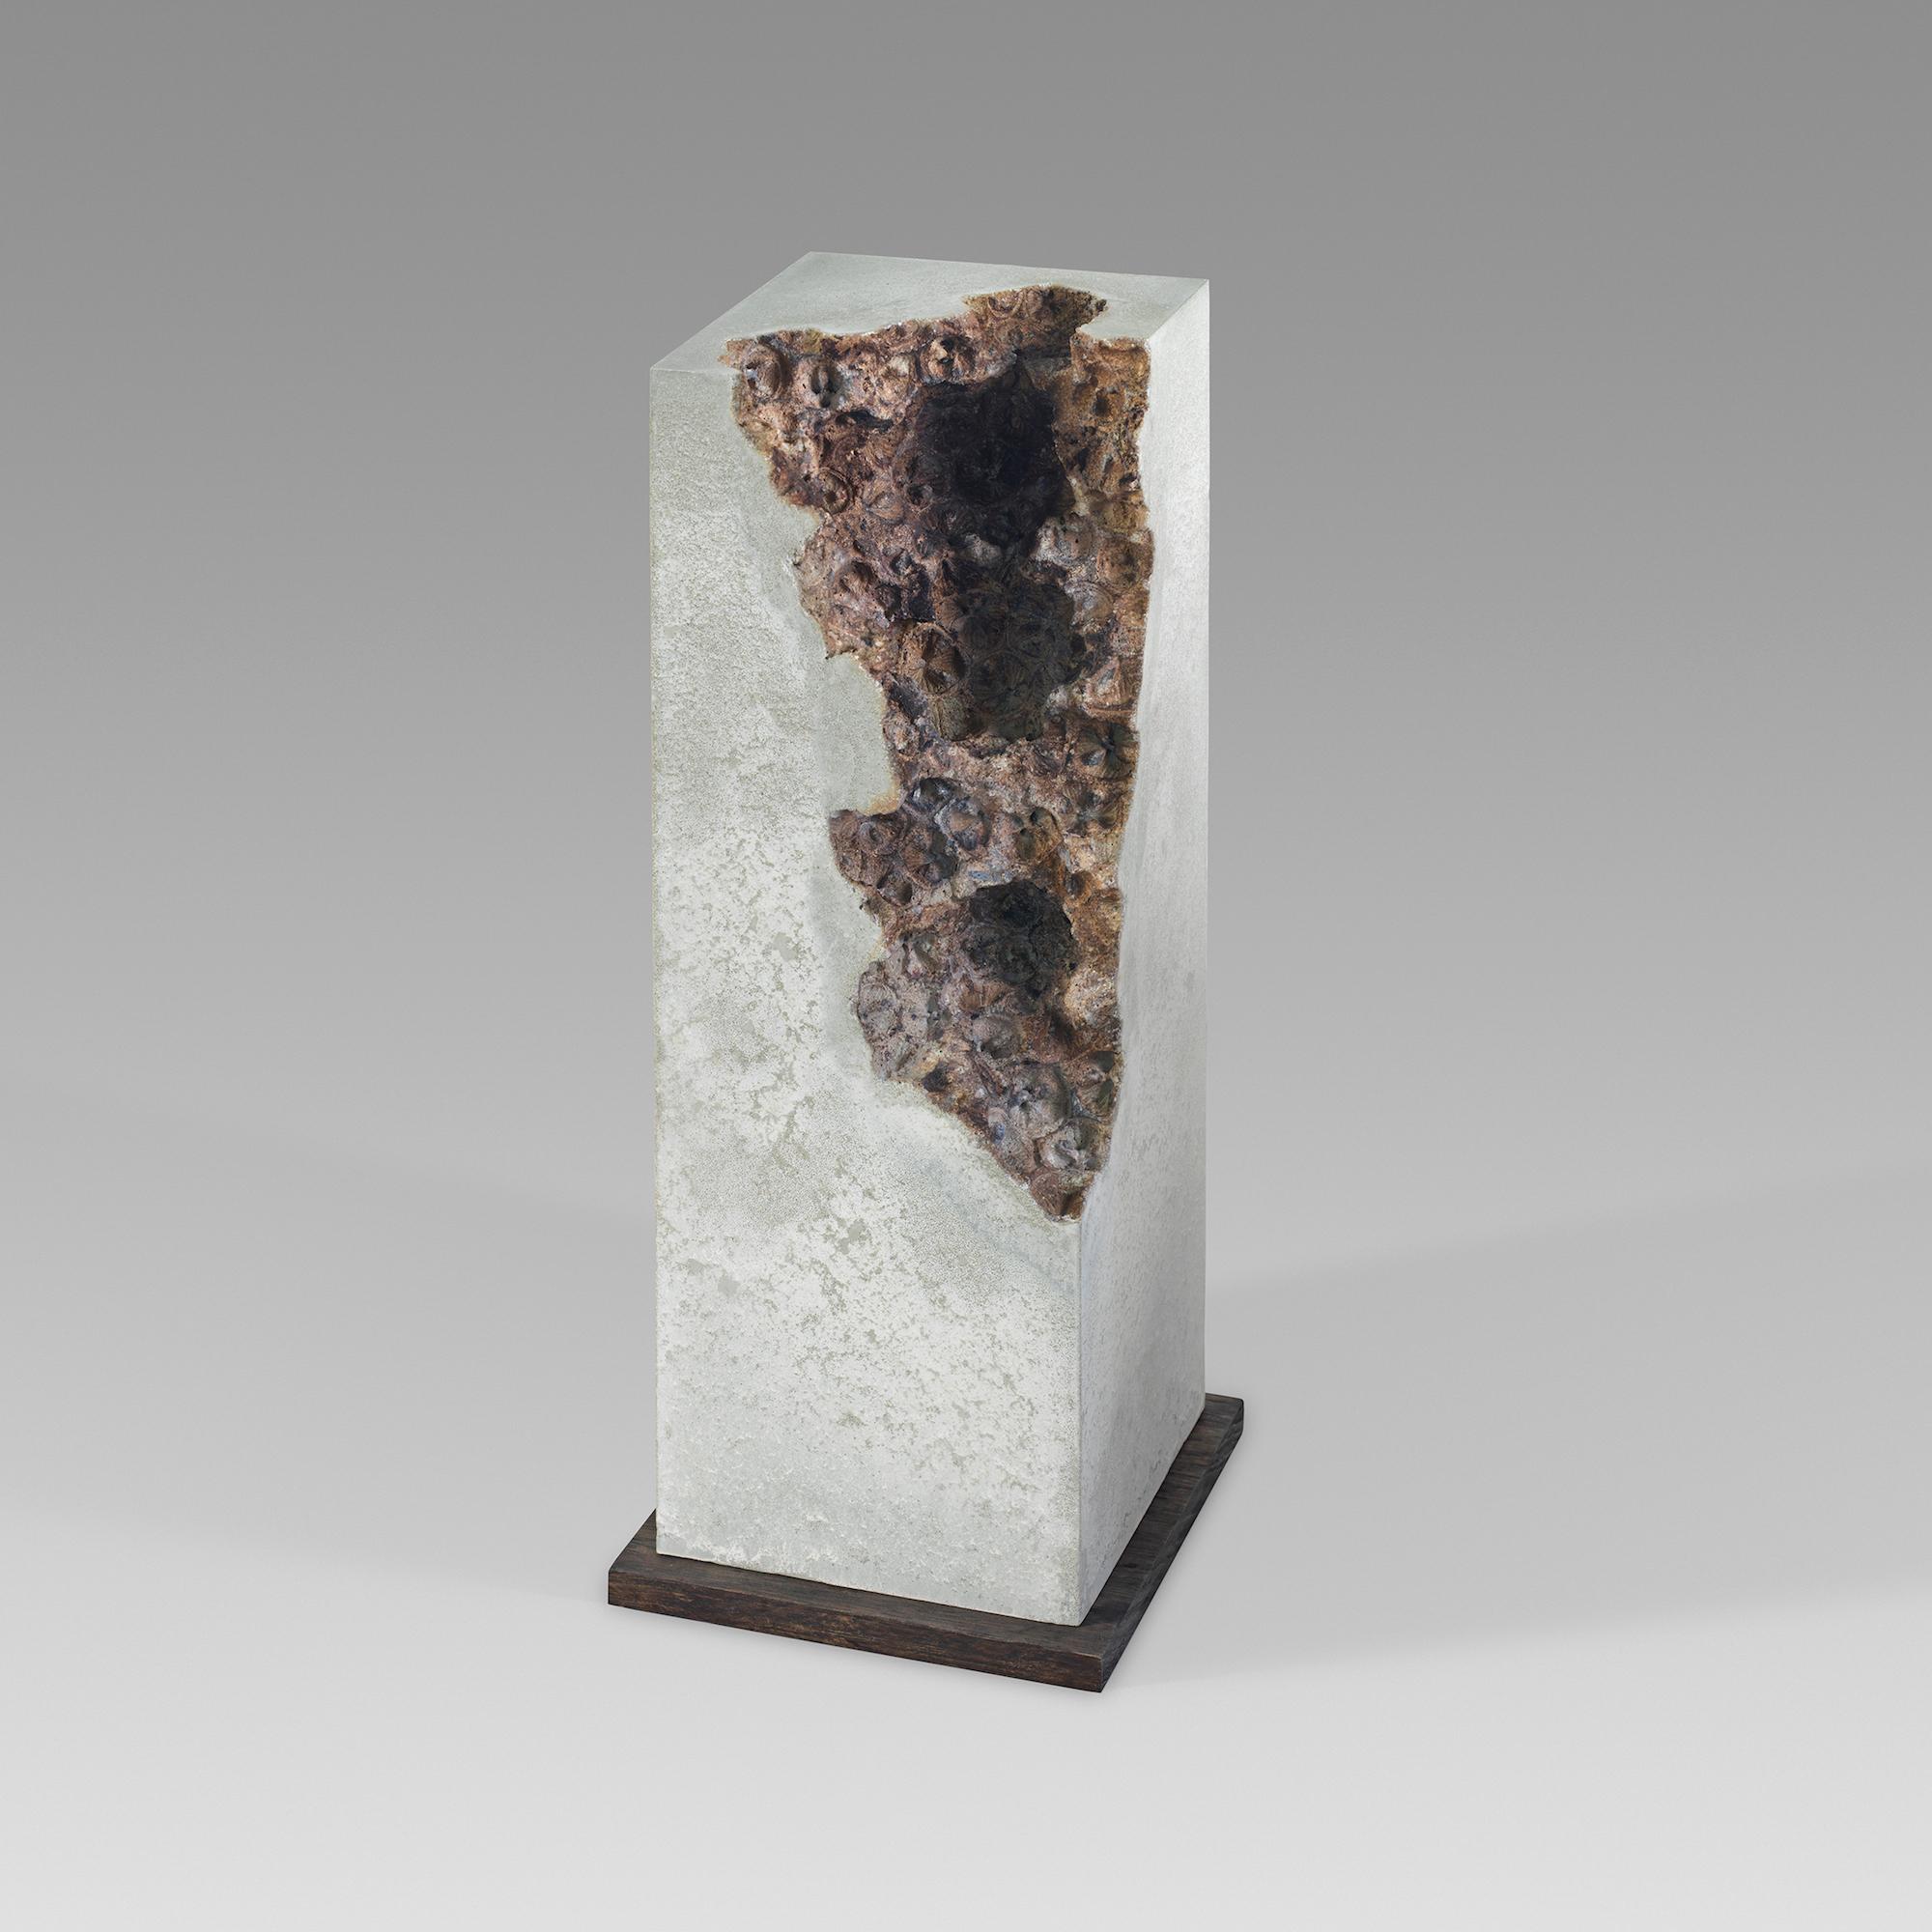 Traces VII is a unique concrete sculpture by contemporary English sculptor Oliver Ashworth-Martin, dimensions are 39 × 13 × 13 cm (15.4 × 5.1 × 5.1 in).
This sculpture is signed by the artist and comes with a certificate of authenticity.